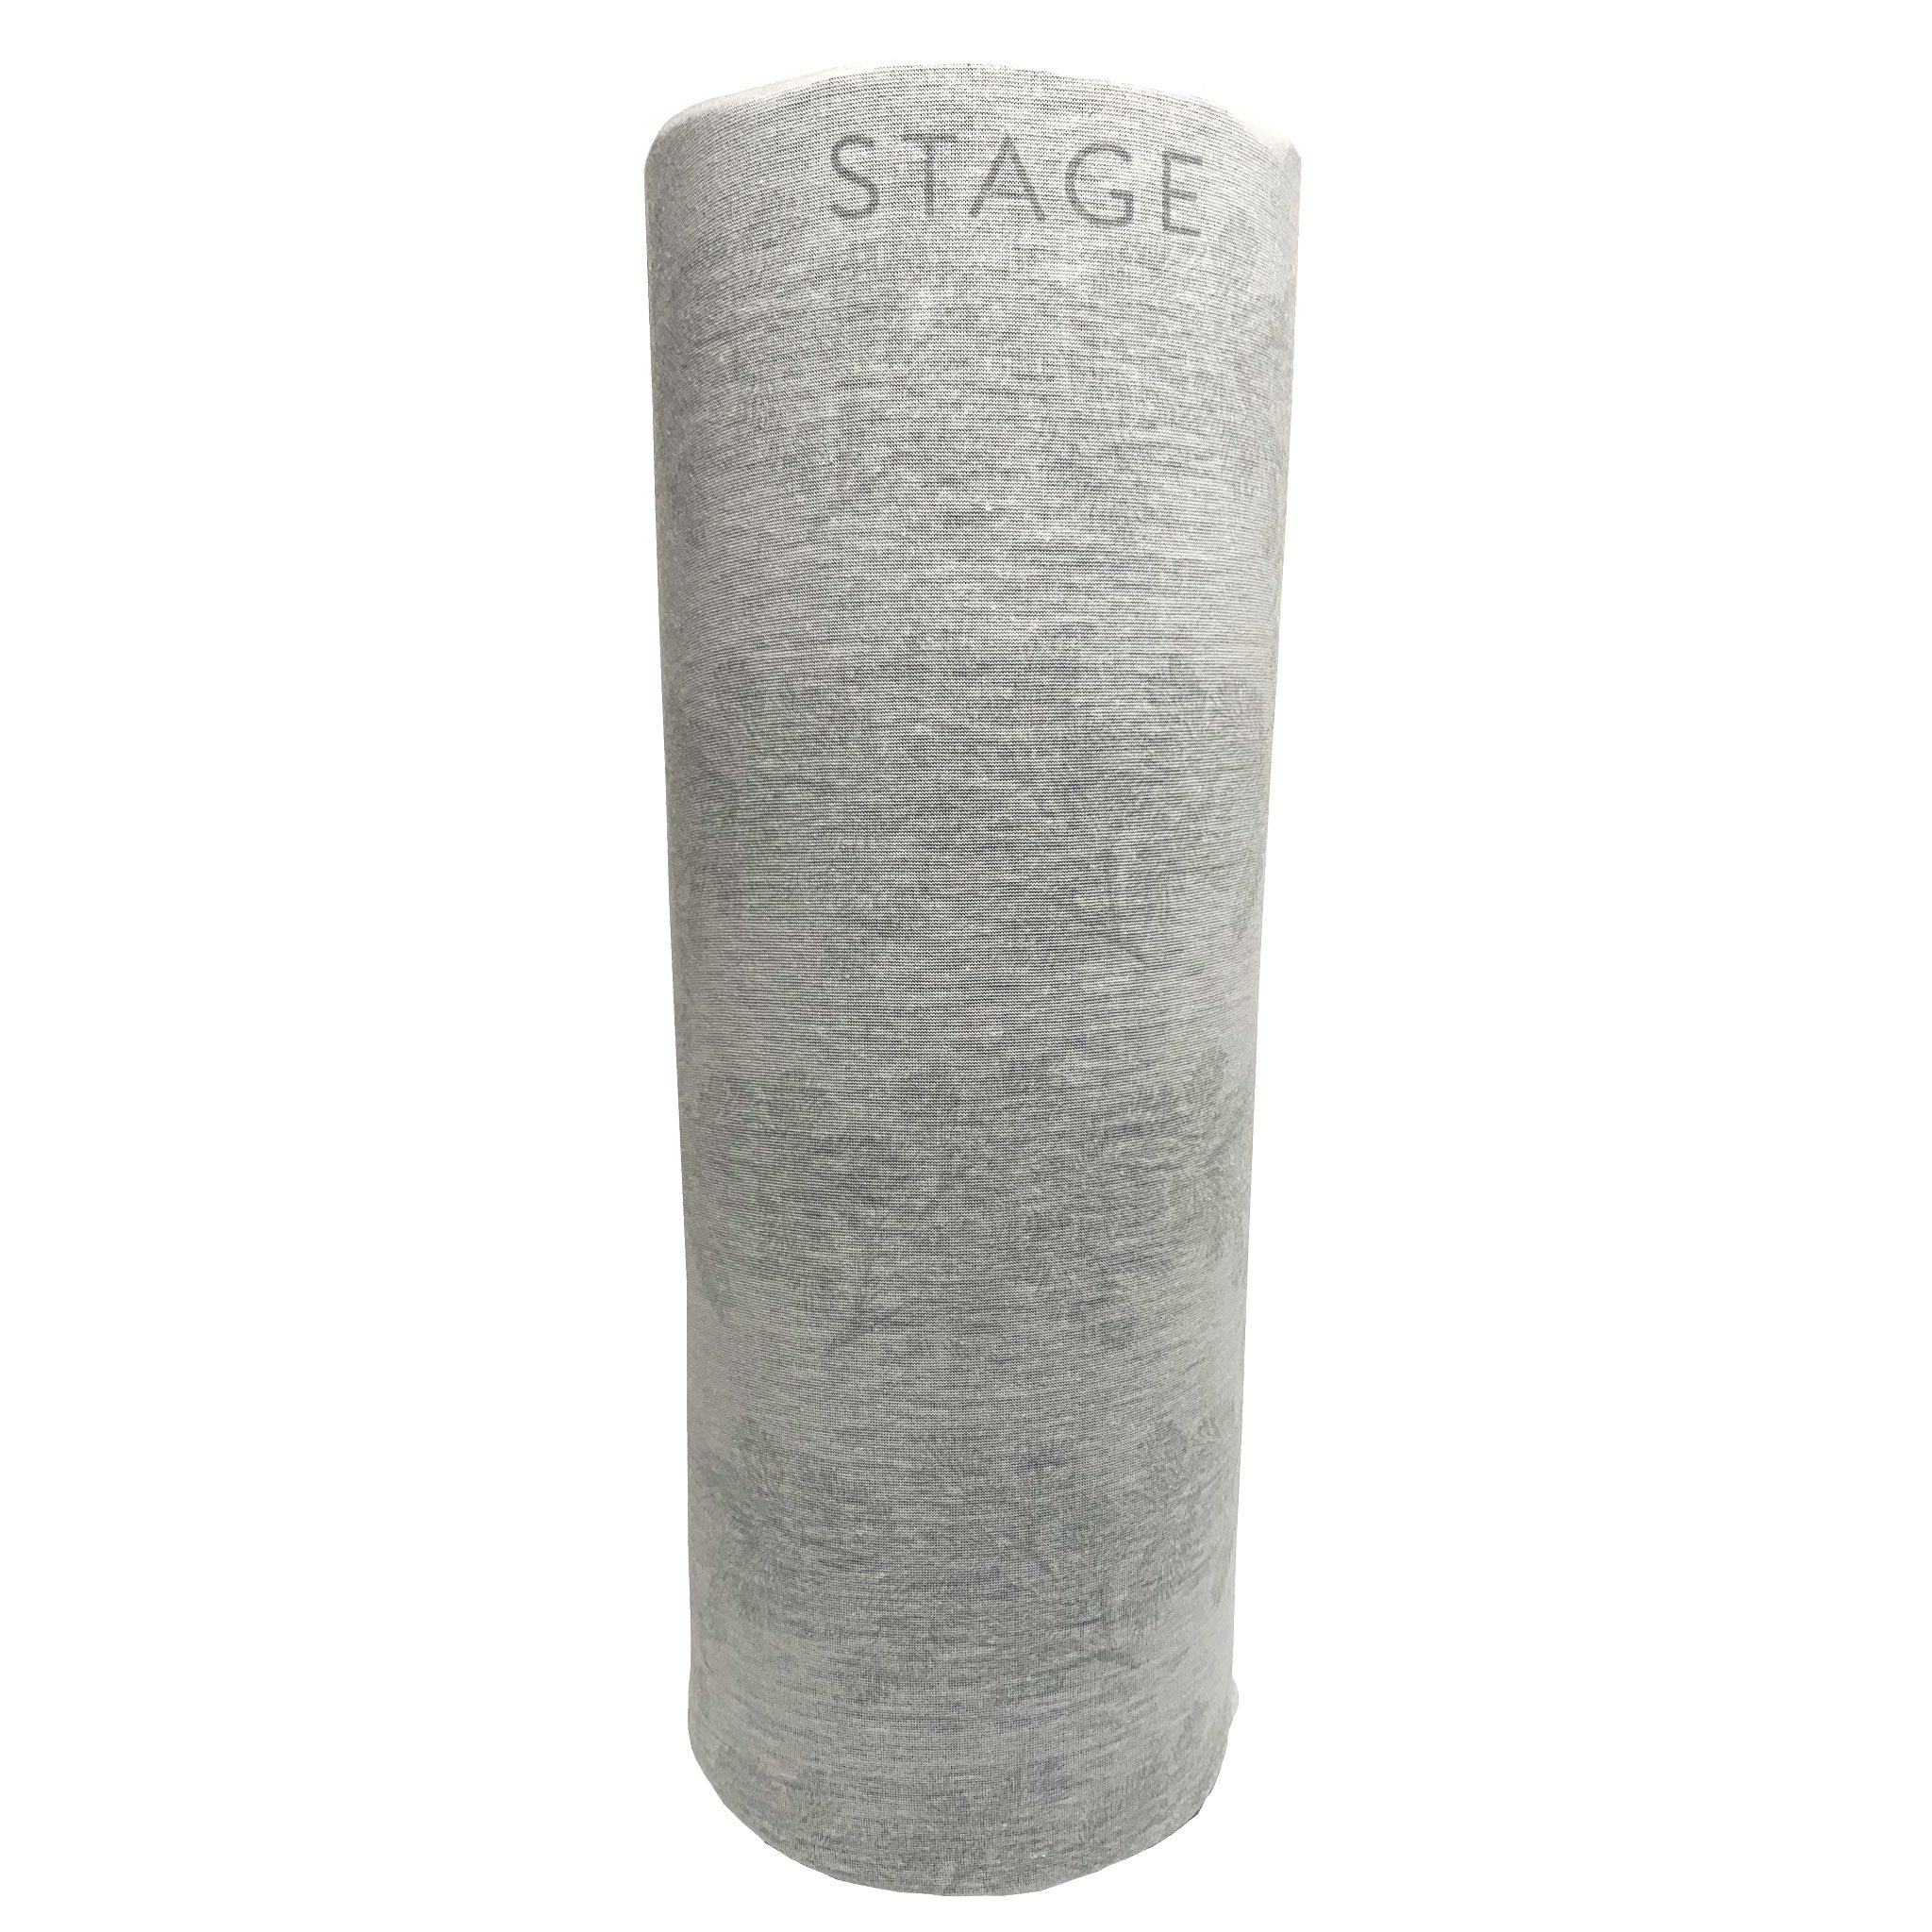 STAGE Face Tube - Floral White - Adult